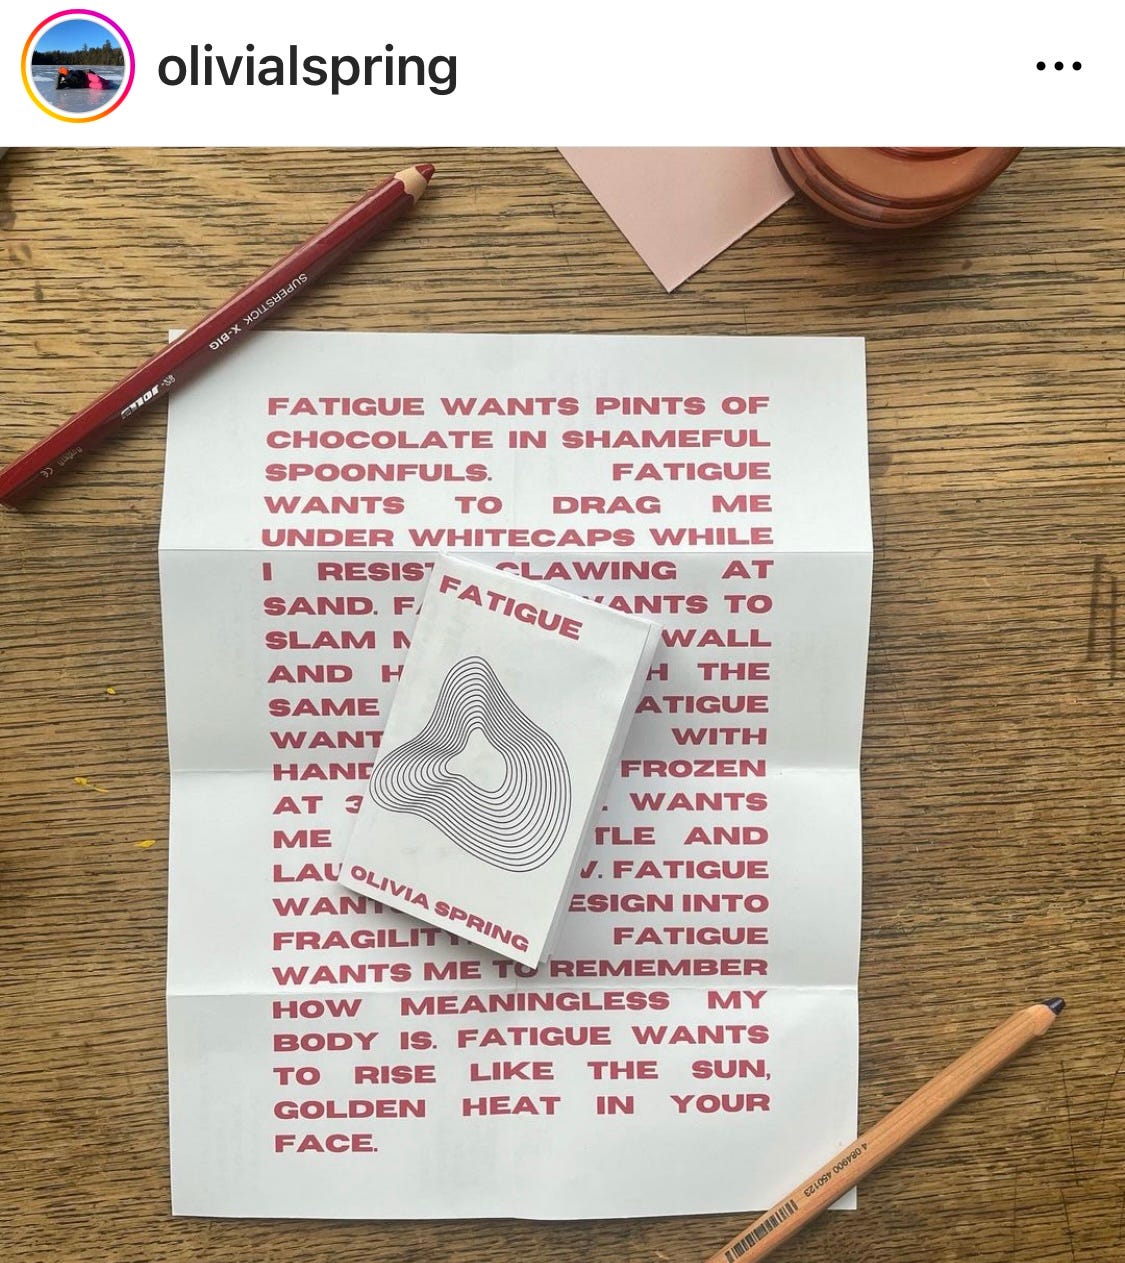 Image of an instagram post from @oliviaspring, a print of red letters on white paper that begins "Fatigue wants pints of chocolate in shameful spoonfuls" on a wood desk with a red pencil nearby.